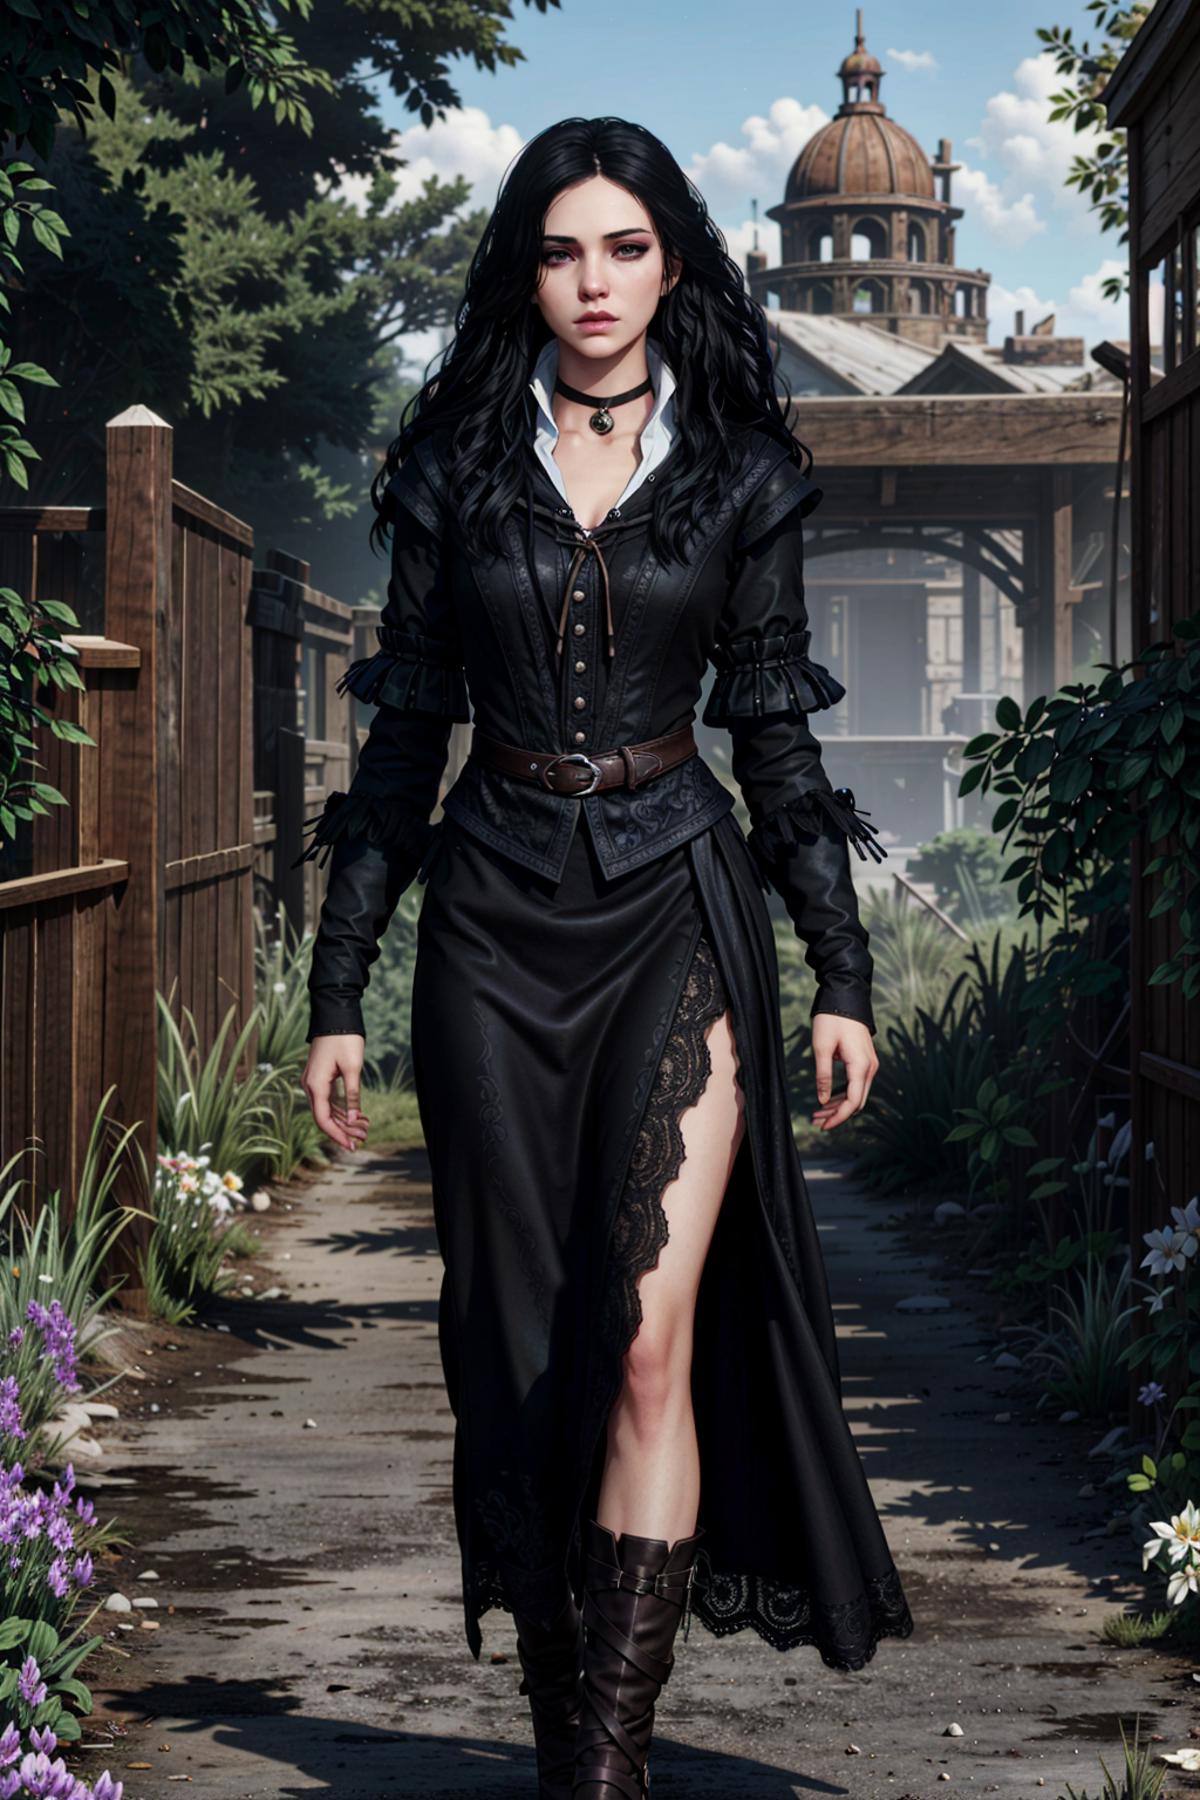 Yennefer from The Witcher image by BloodRedKittie